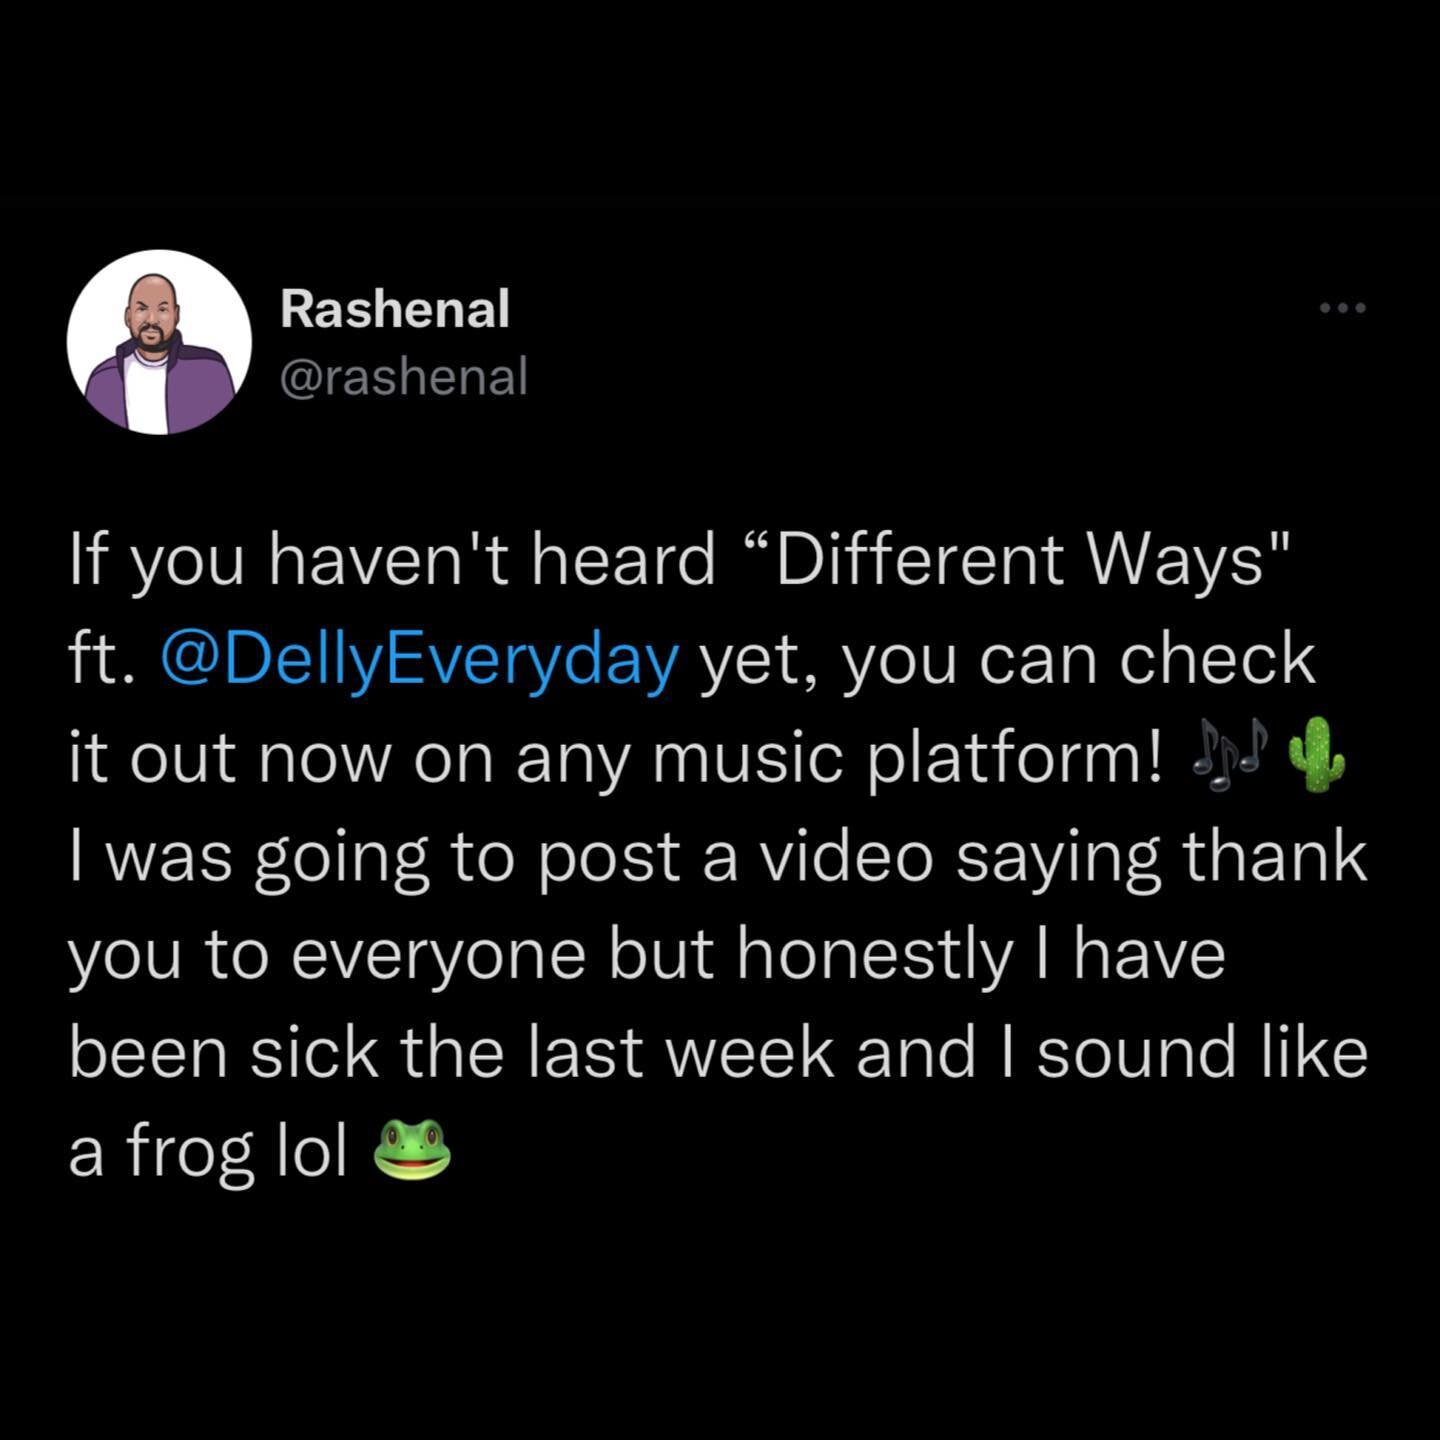 If you haven't heard &ldquo;Different Ways&quot; ft. @dellyeveryday yet, you can check it out now on any music platform! 🎶🌵 I was going to post a video saying thank you to everyone but honestly I have been sick the last week and I sound like a frog